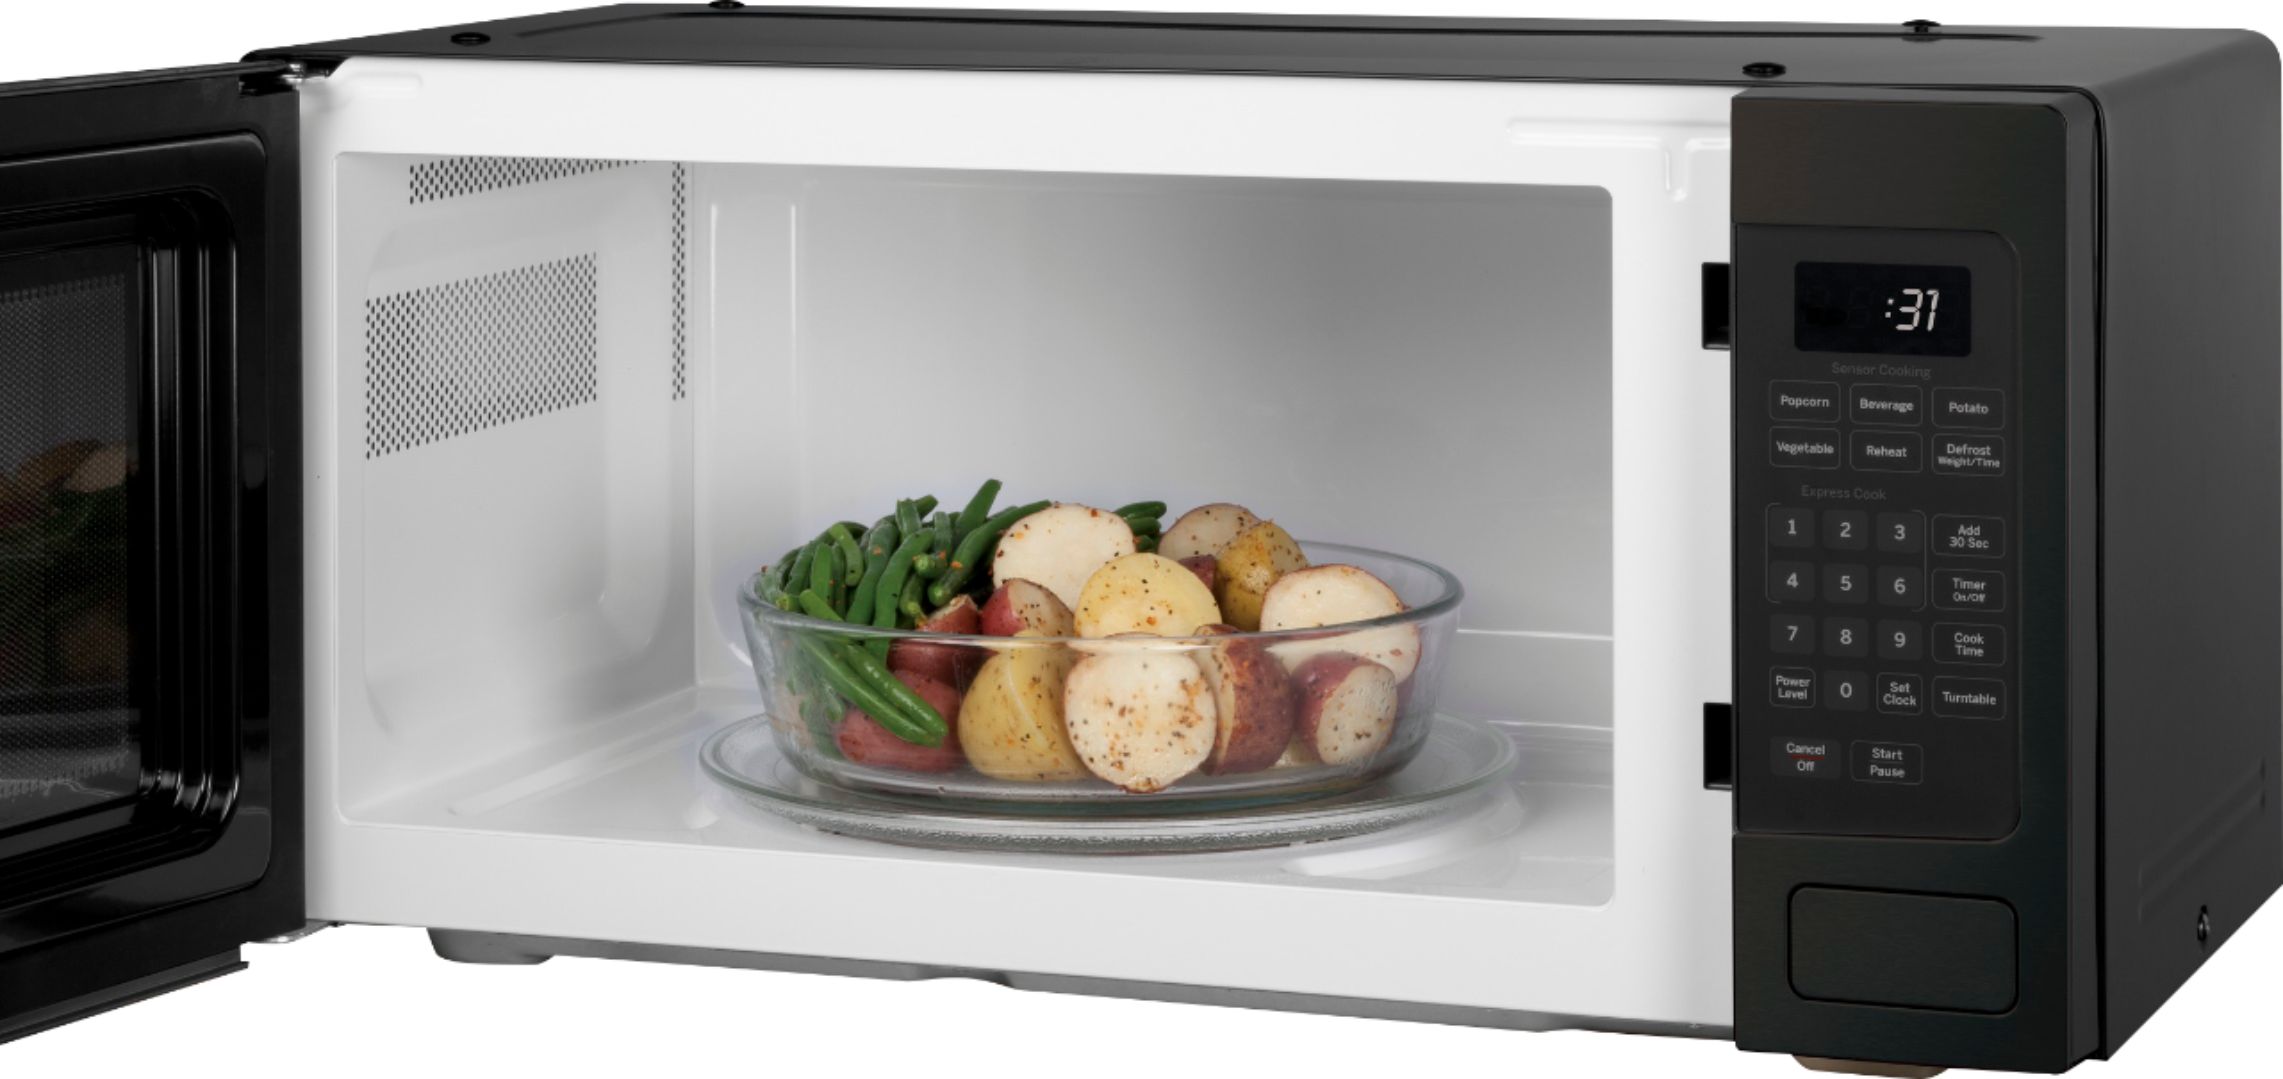 Left View: GE Profile - 1.1 Cu. Ft. Microwave - Black stainless steel